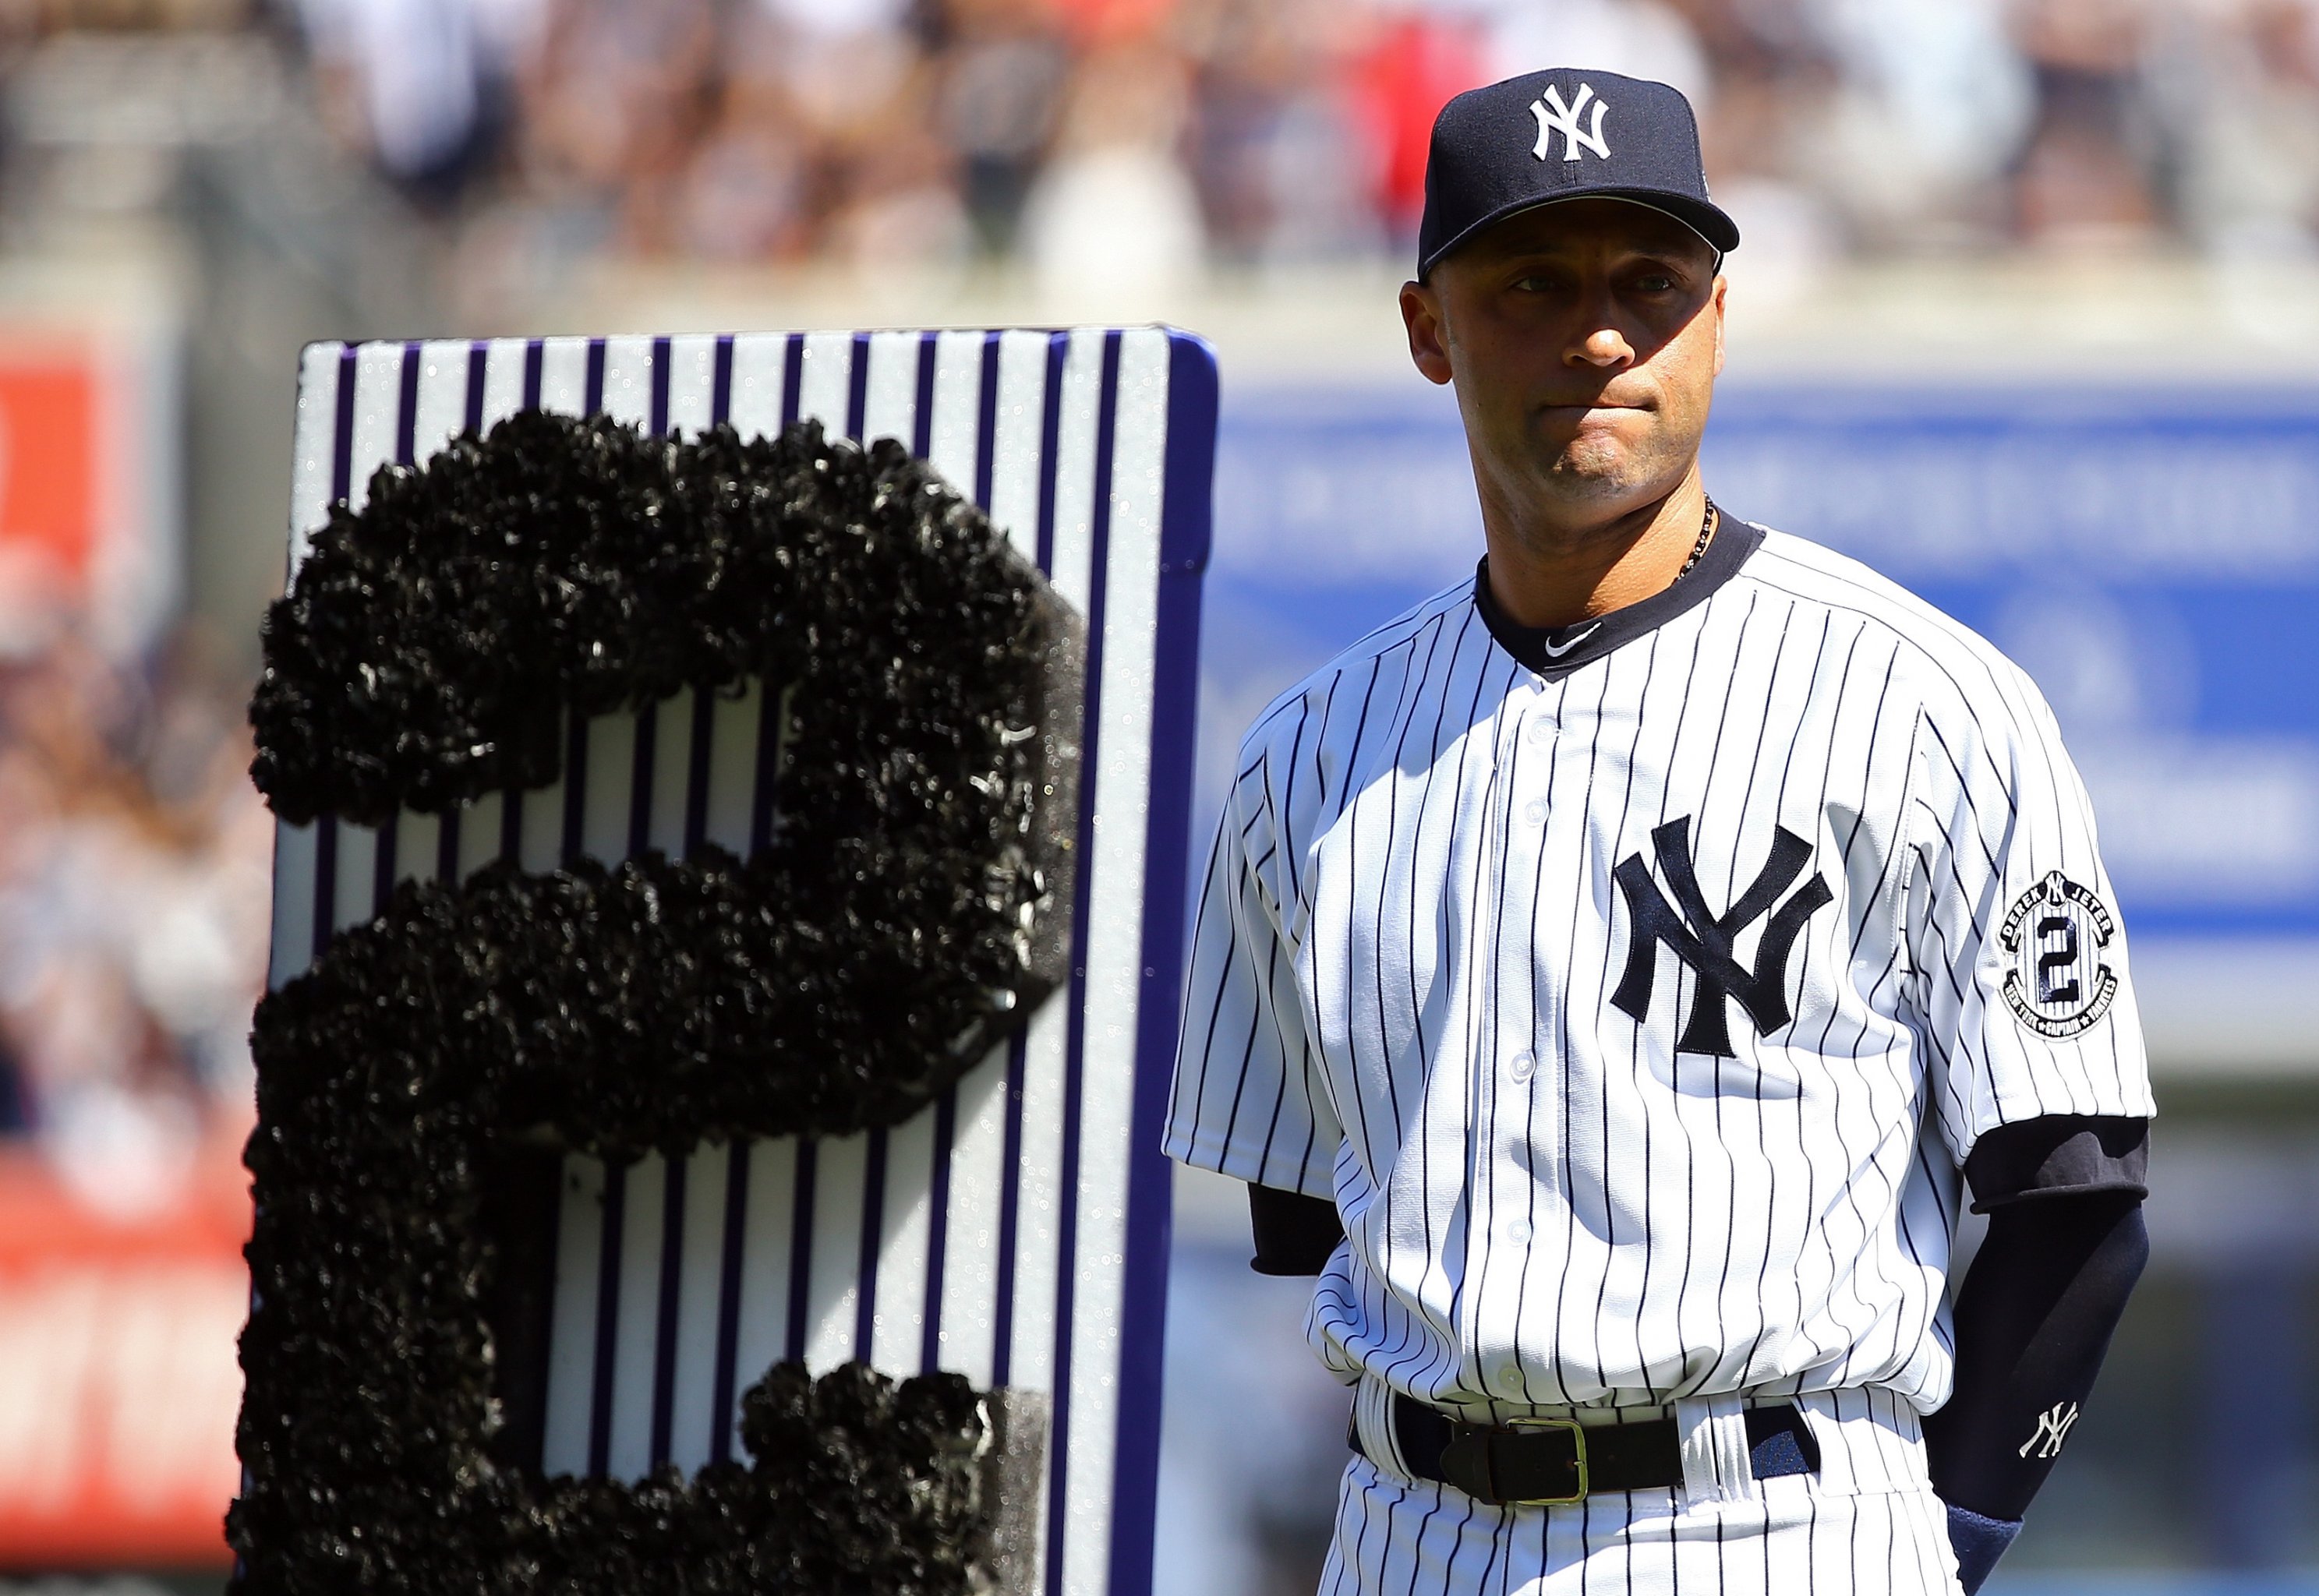 What truly made Derek Jeter one of the greatest